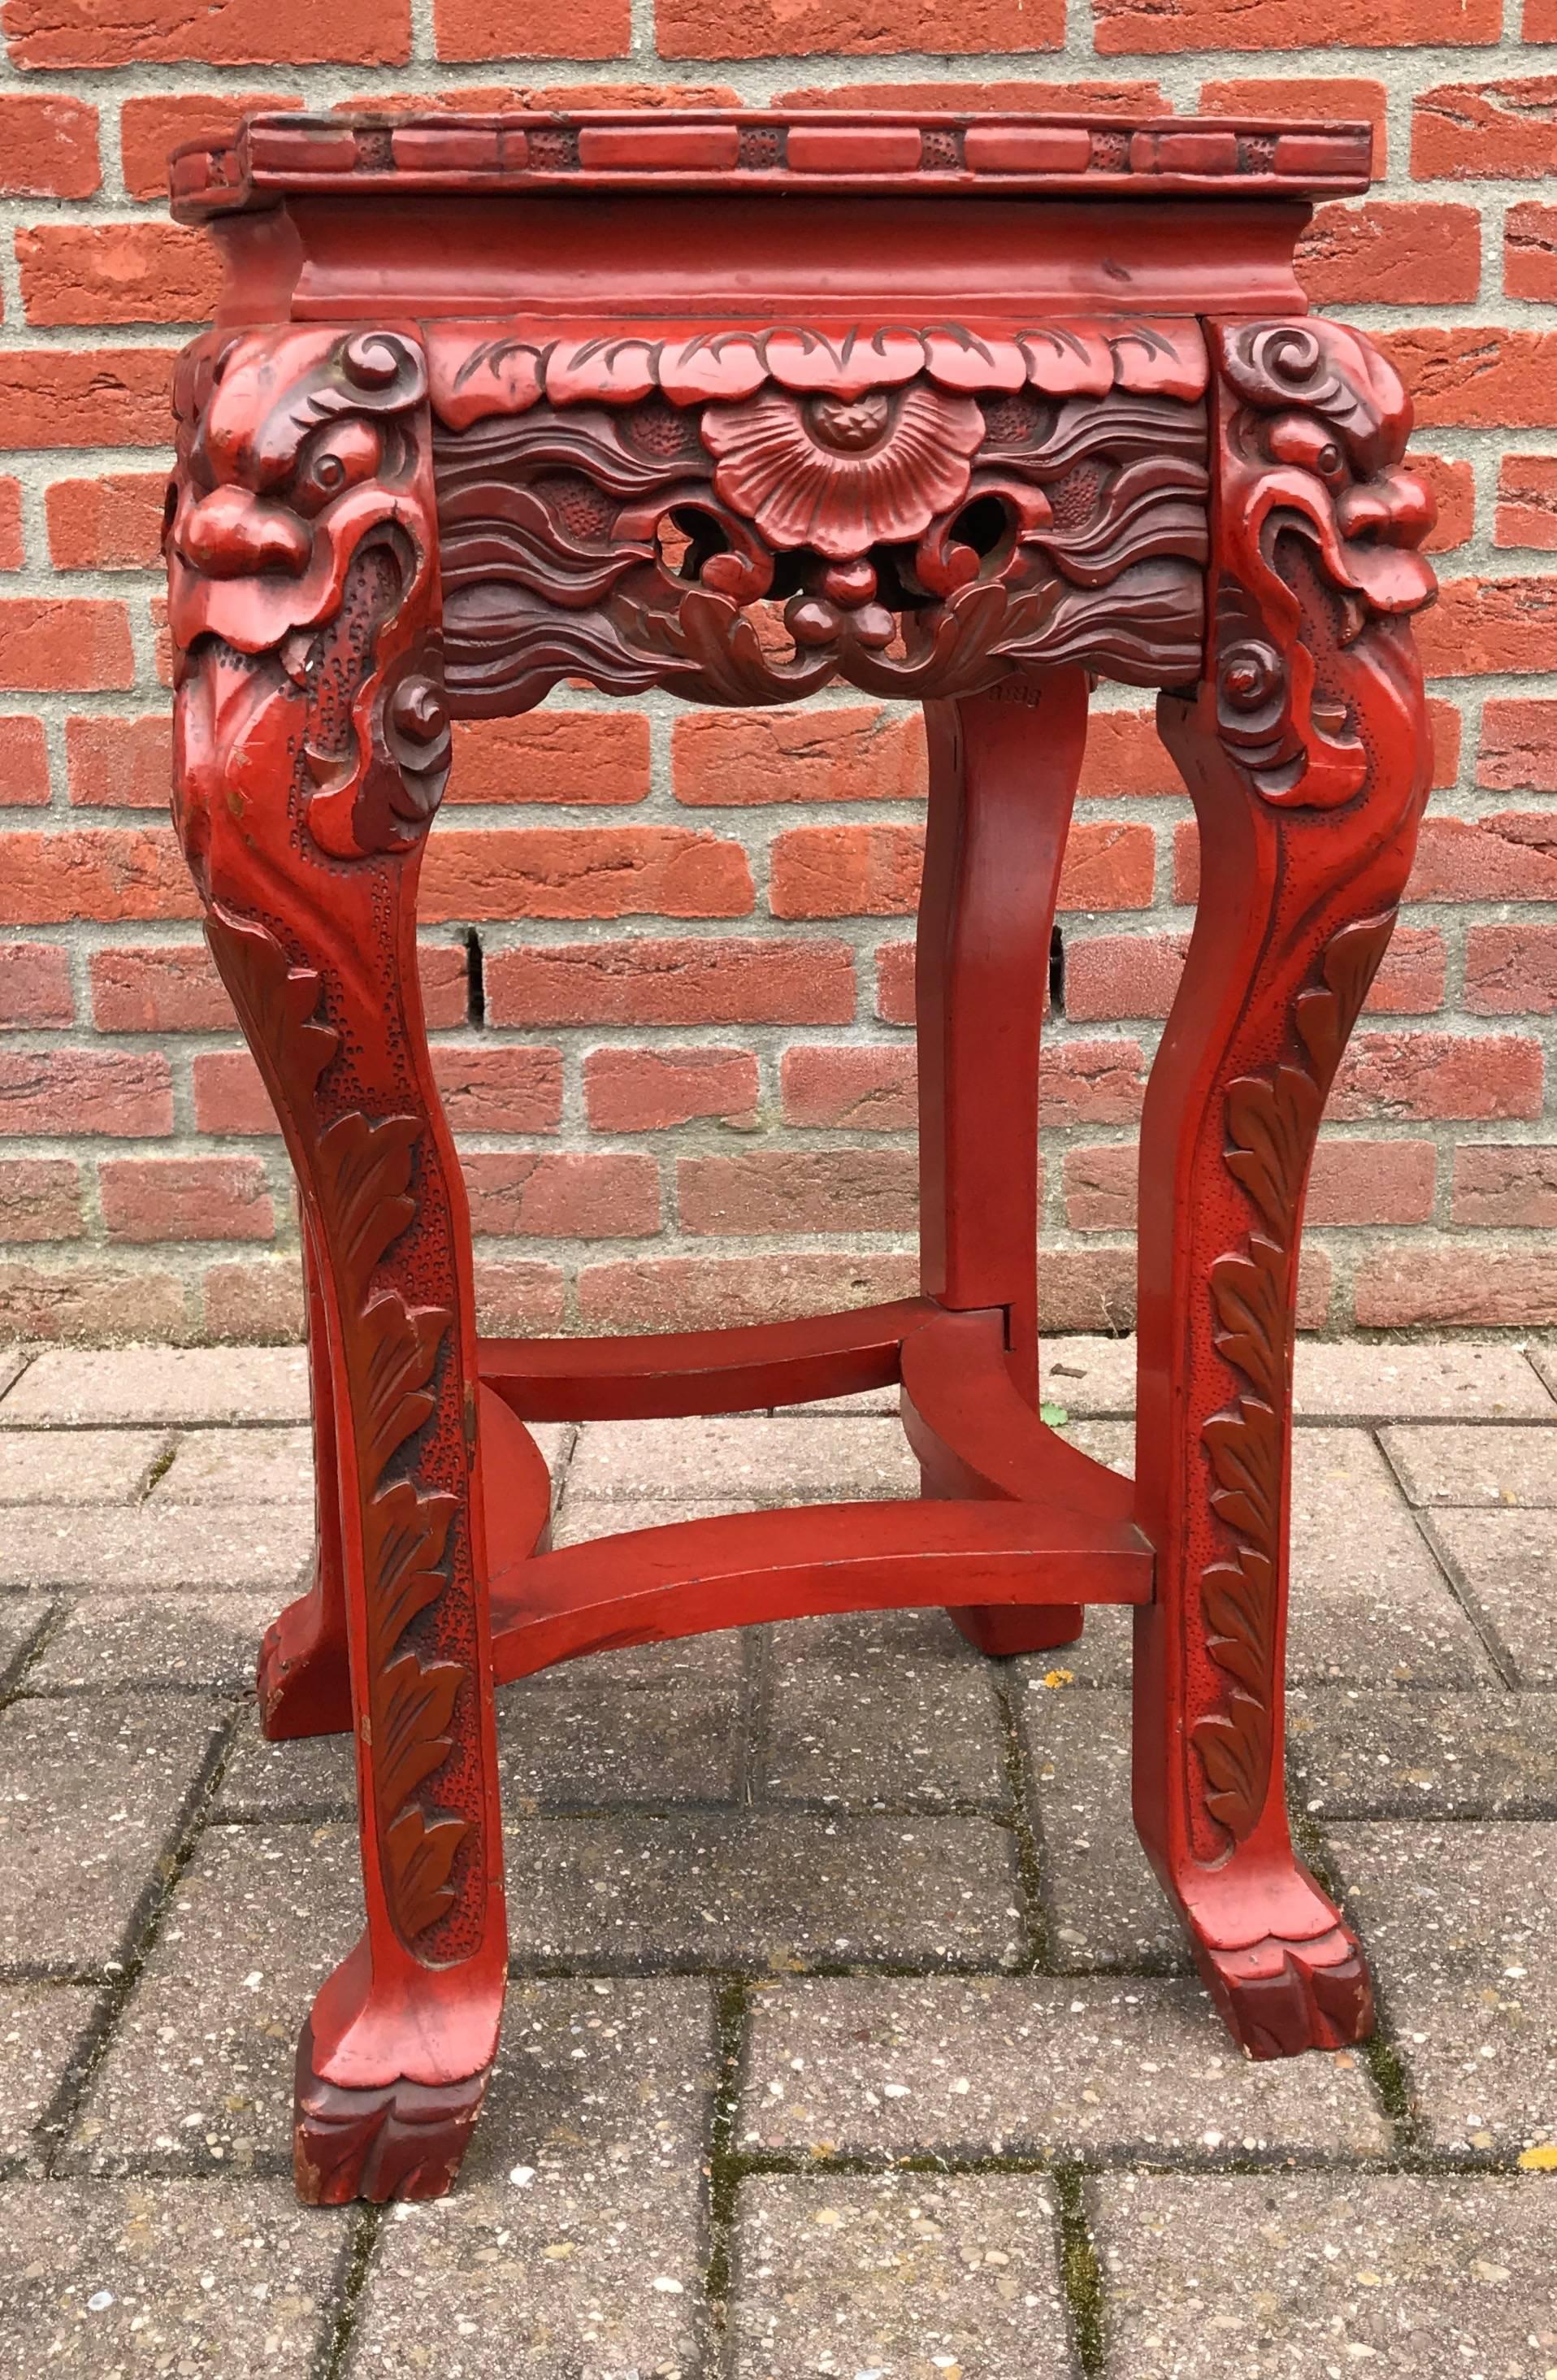 Unique and highly decorative, Japanese table or stand.

This rare and ornate, hand-carved Japanese table is marked at the bottom with a paper makers' label. It reads 'made in Japan' and there also is some sort of monogram (see image 10).

This